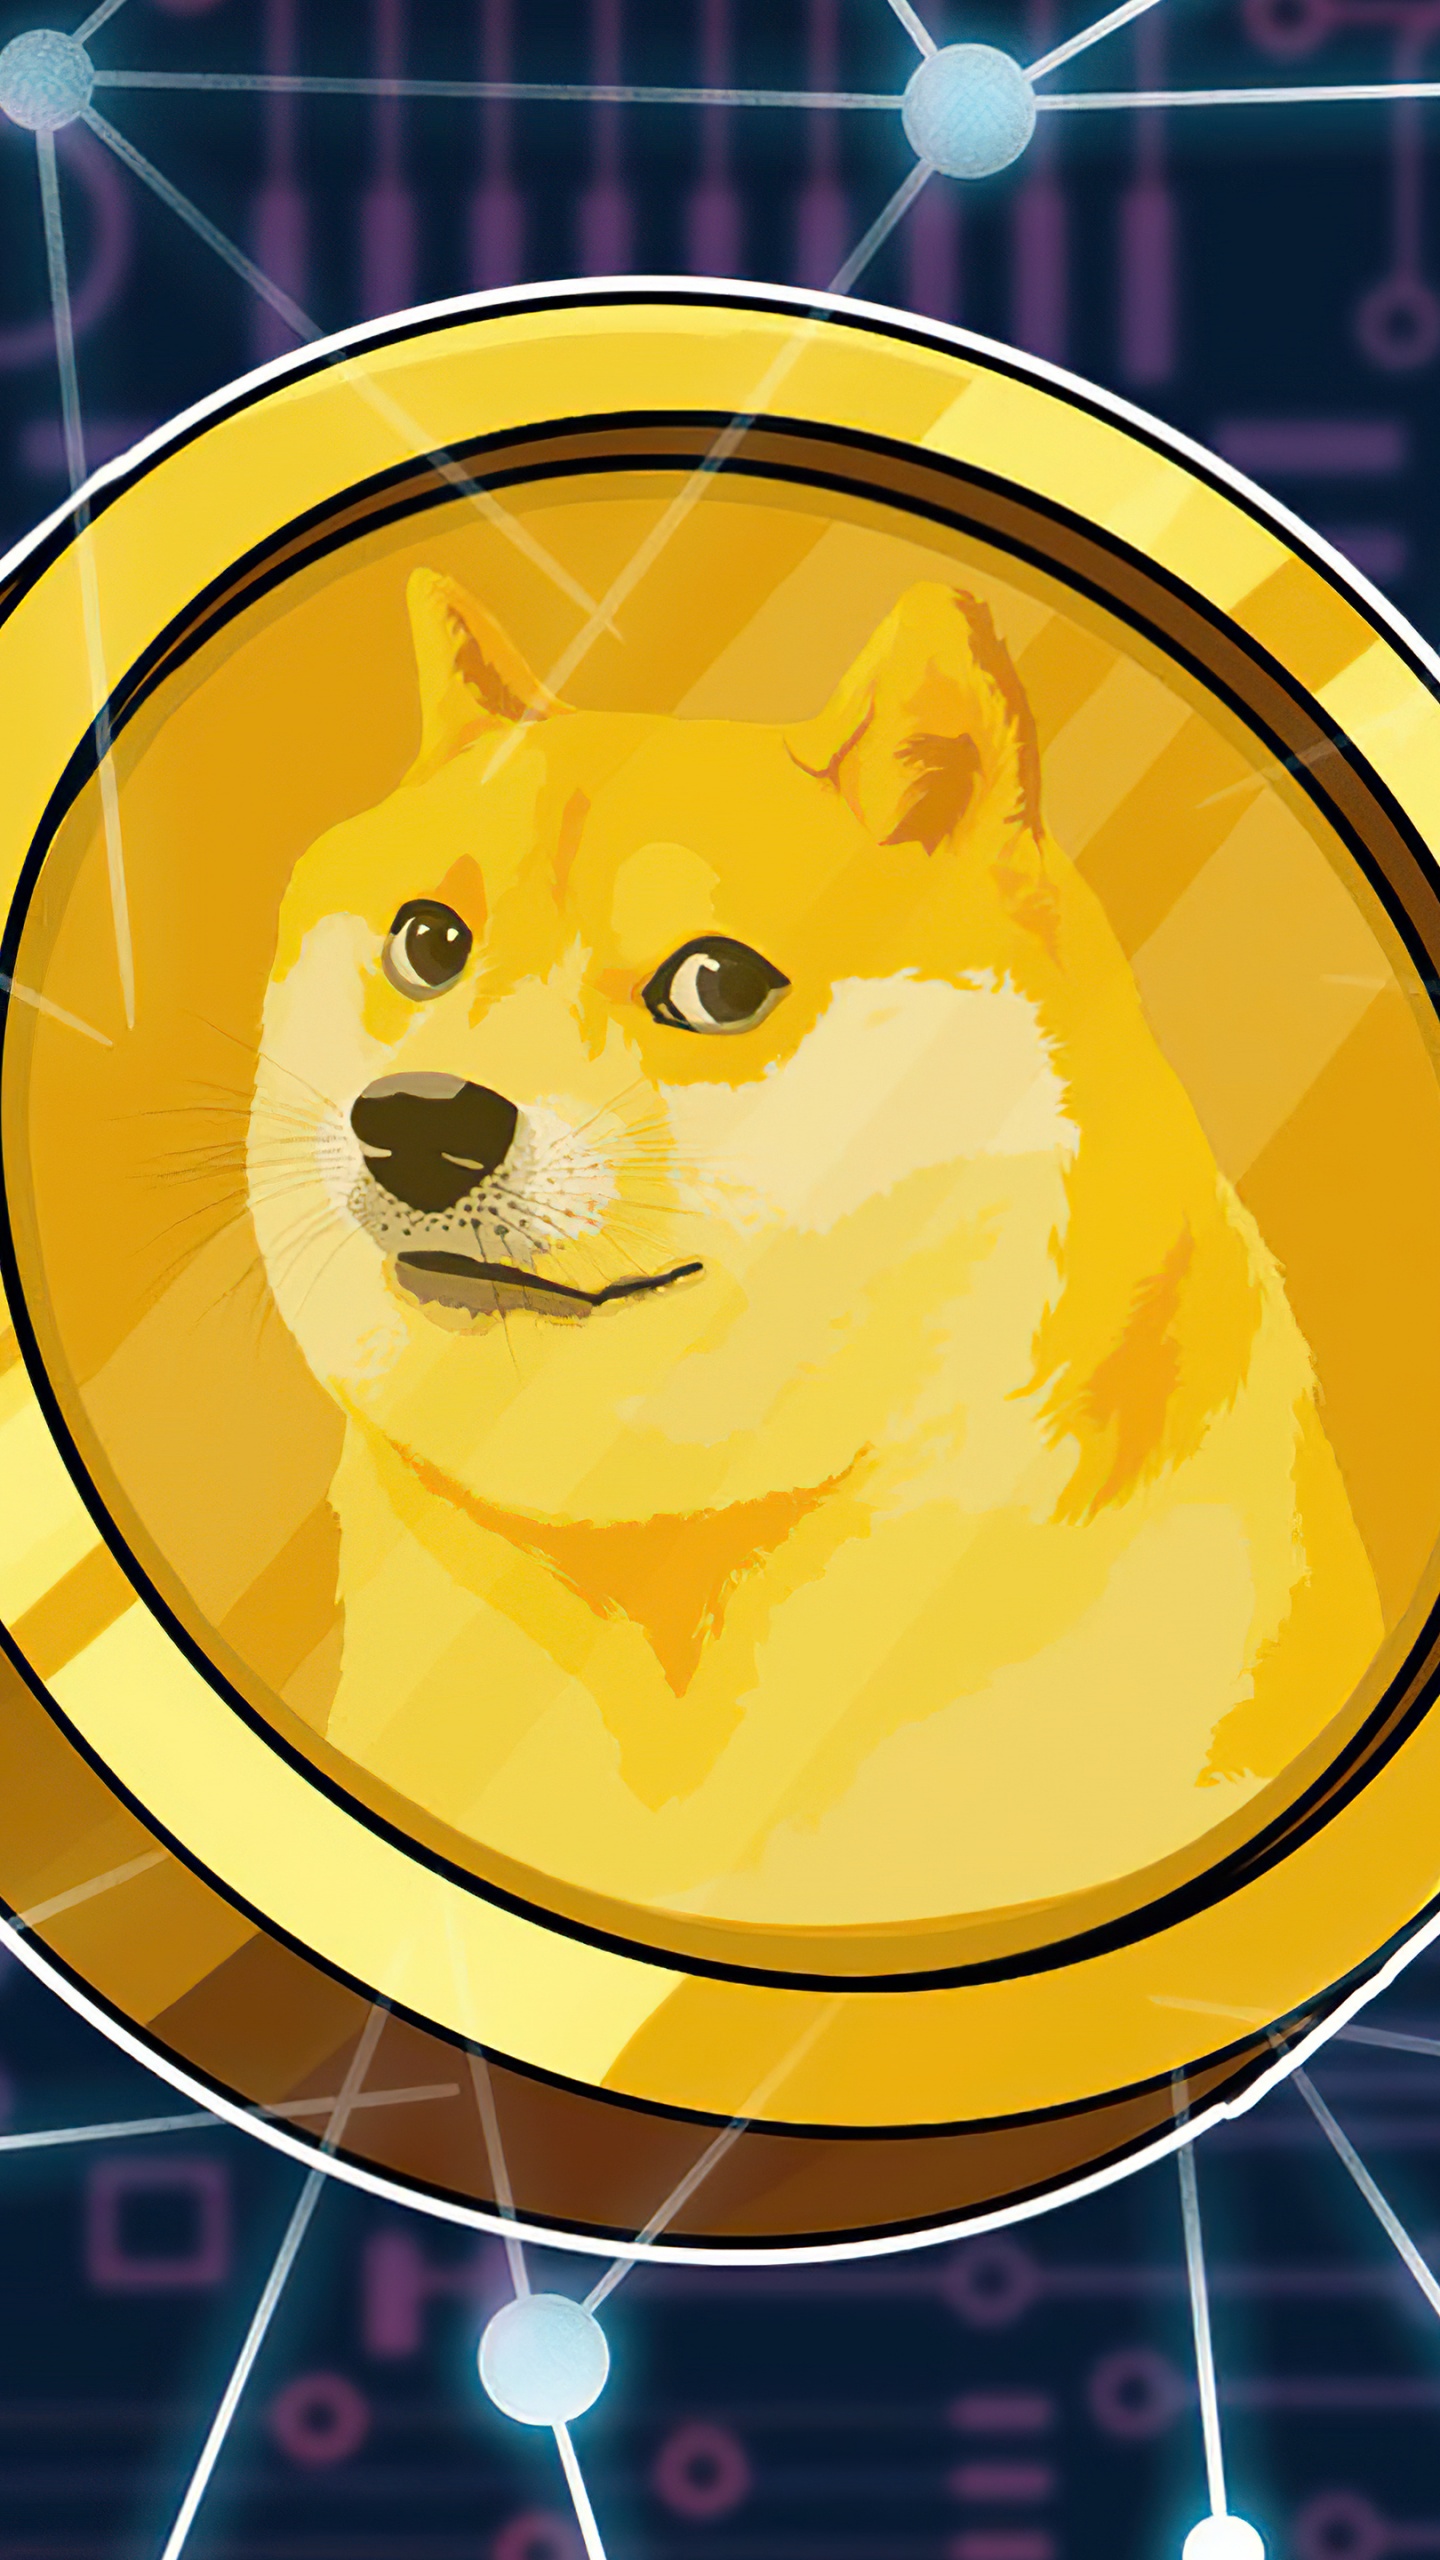 Dogecoin Wallpaper 4K, Cryptocurrency, Golden